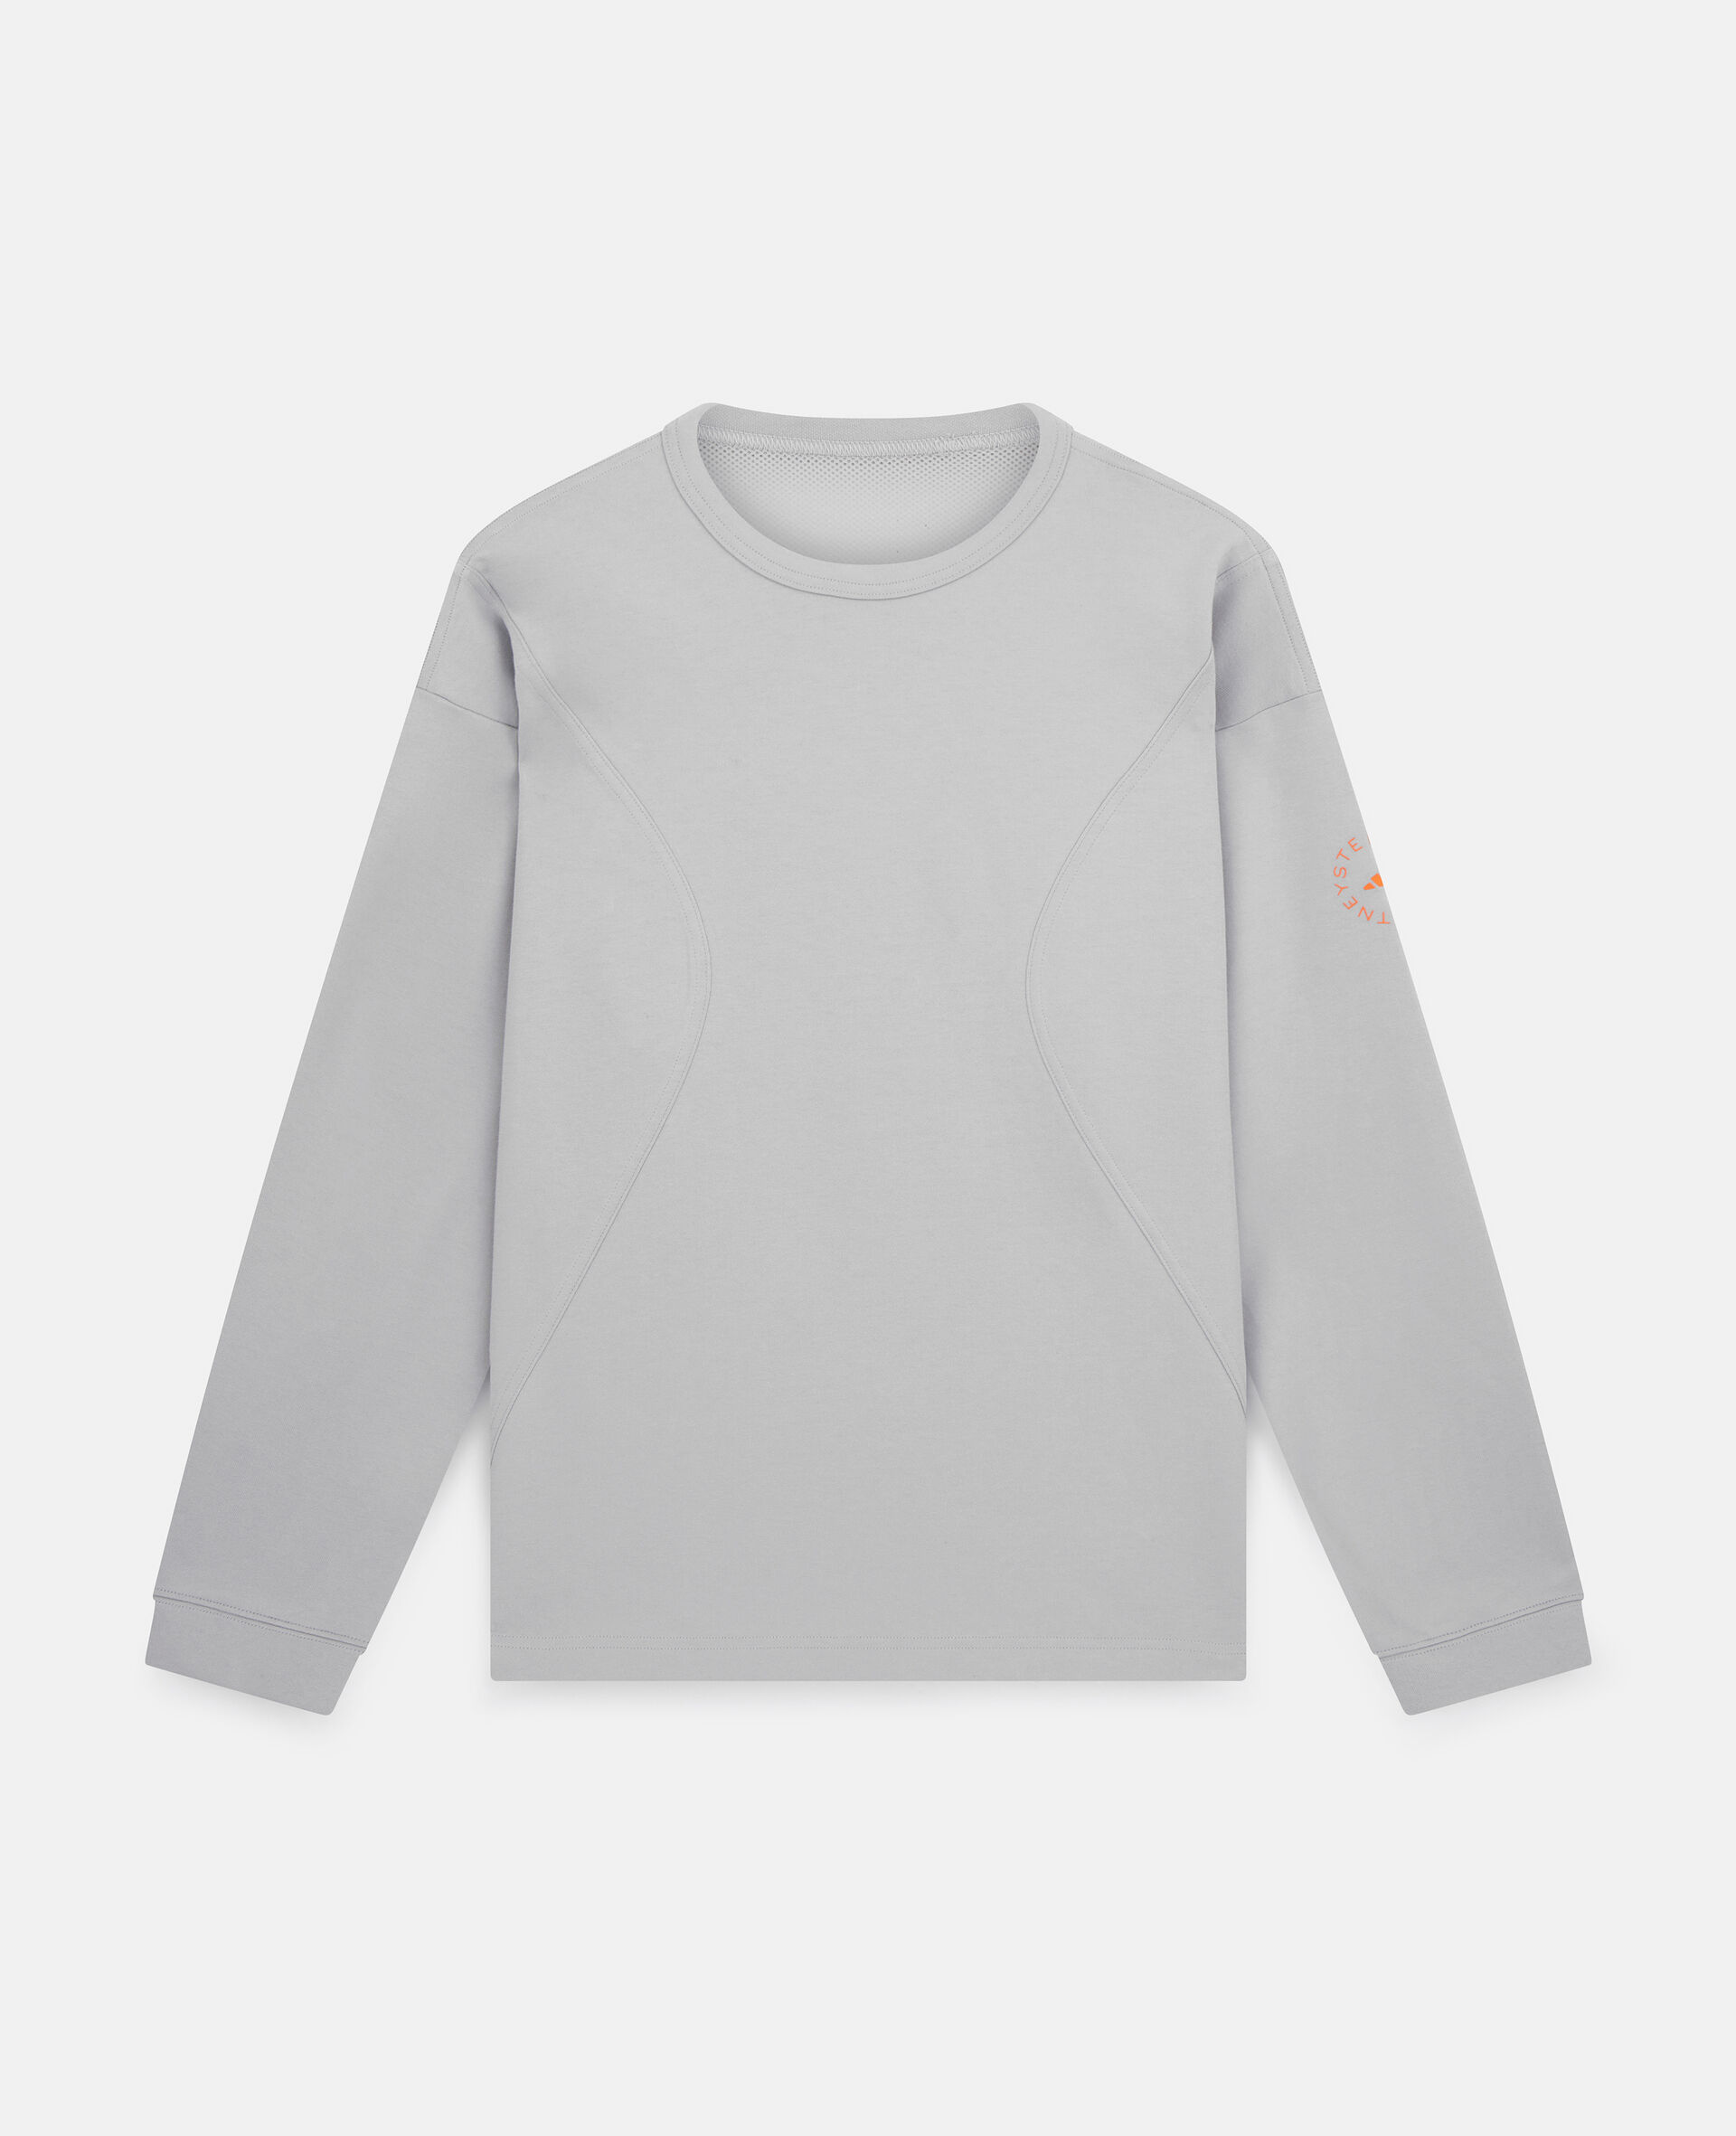 Long-Sleeve Sports Top-Grey-large